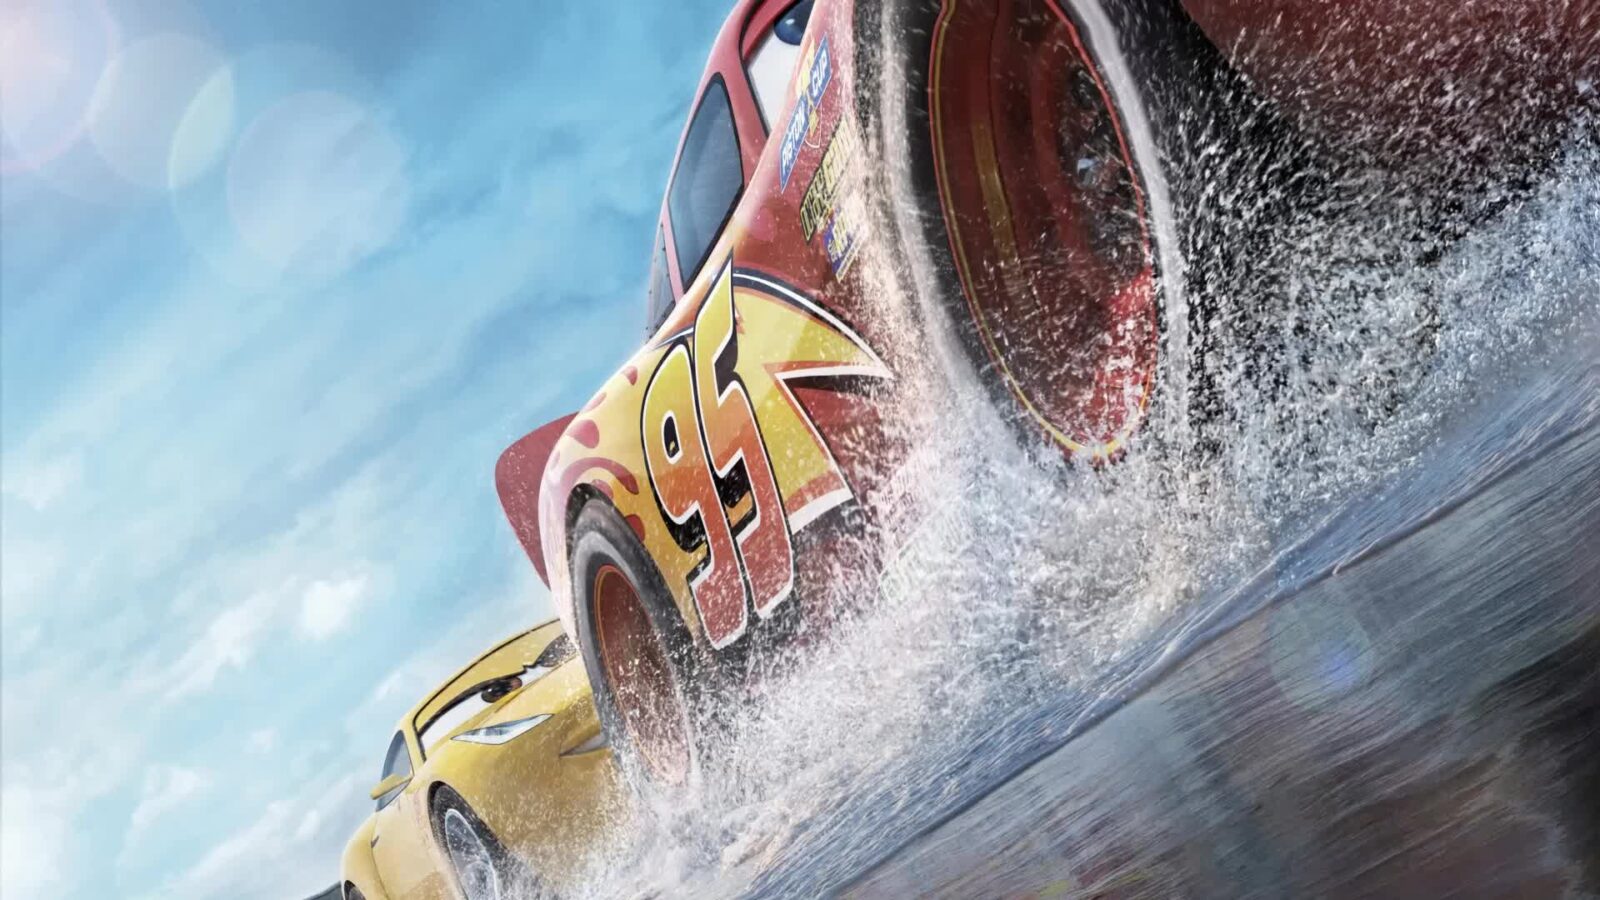 LiveWallpapers4Free.com | Cars 3 Movie Water Spray Race - Free Live Wallpaper